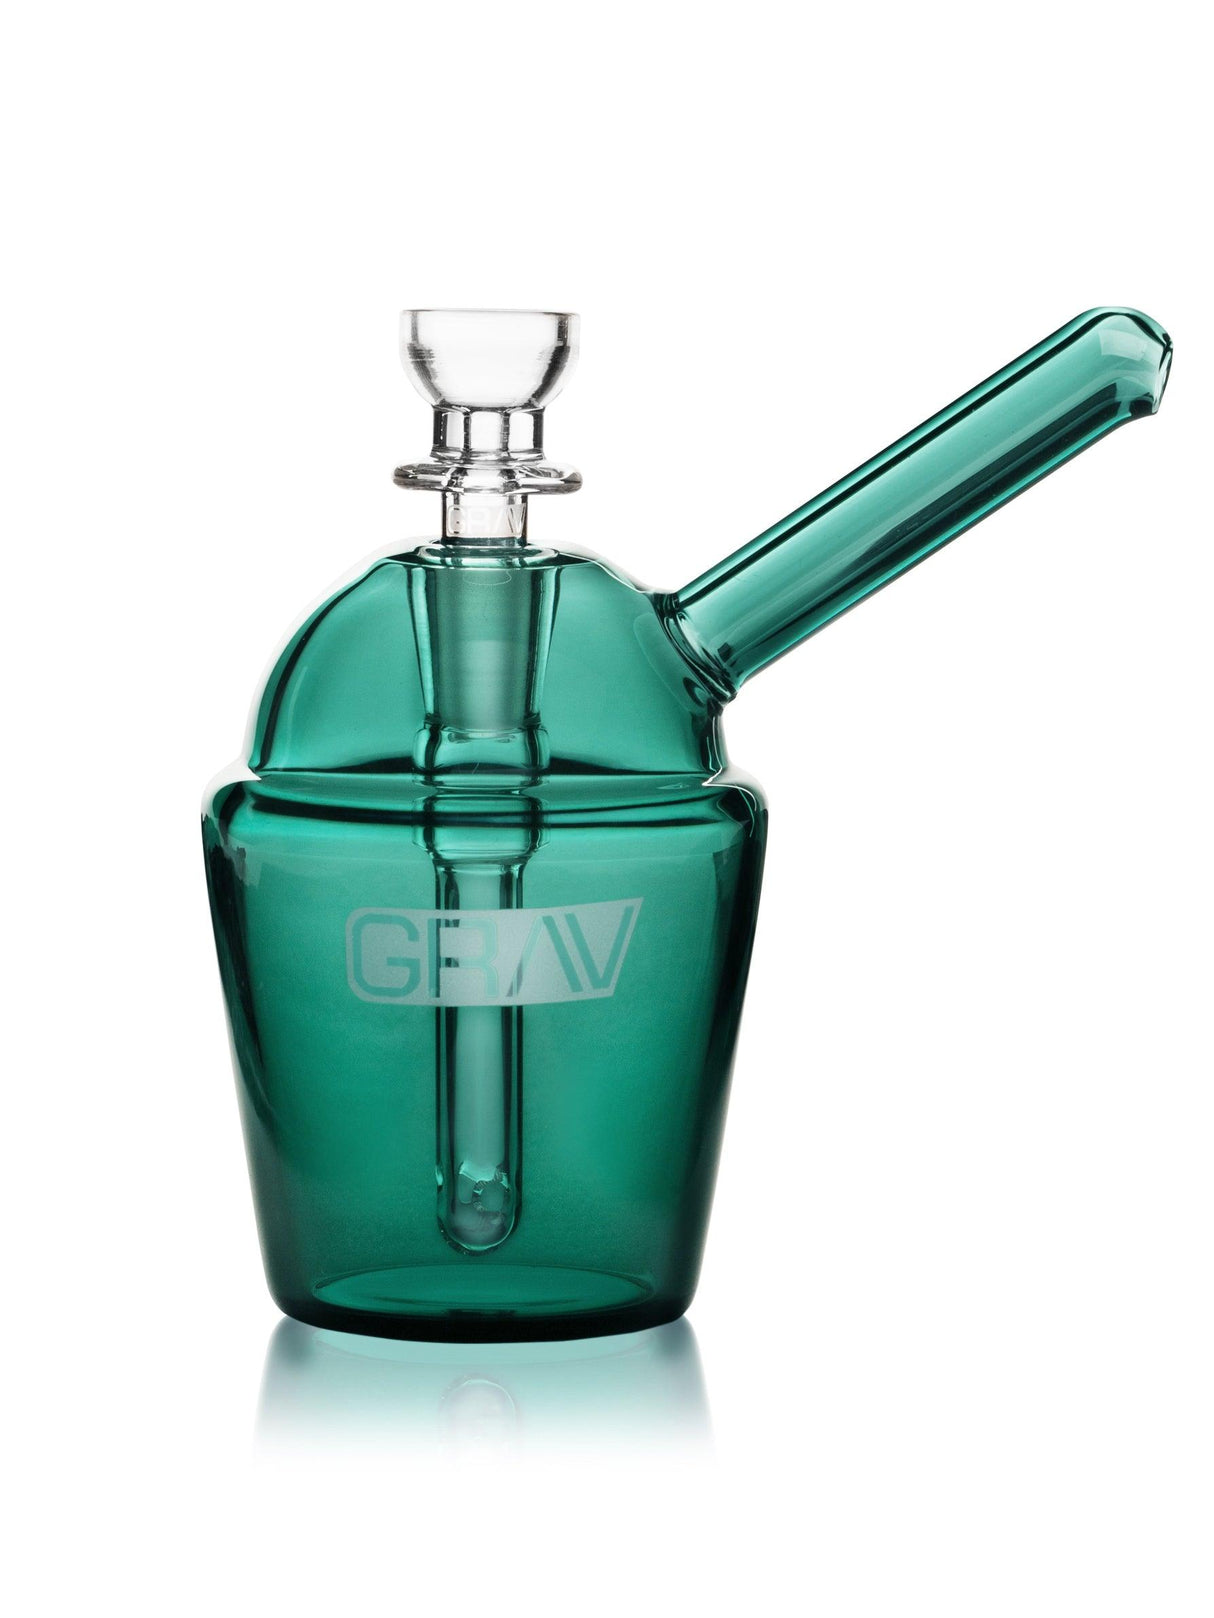 GRAV Slush Cup Pocket Bubbler in Teal - Front View with Transparent Glass